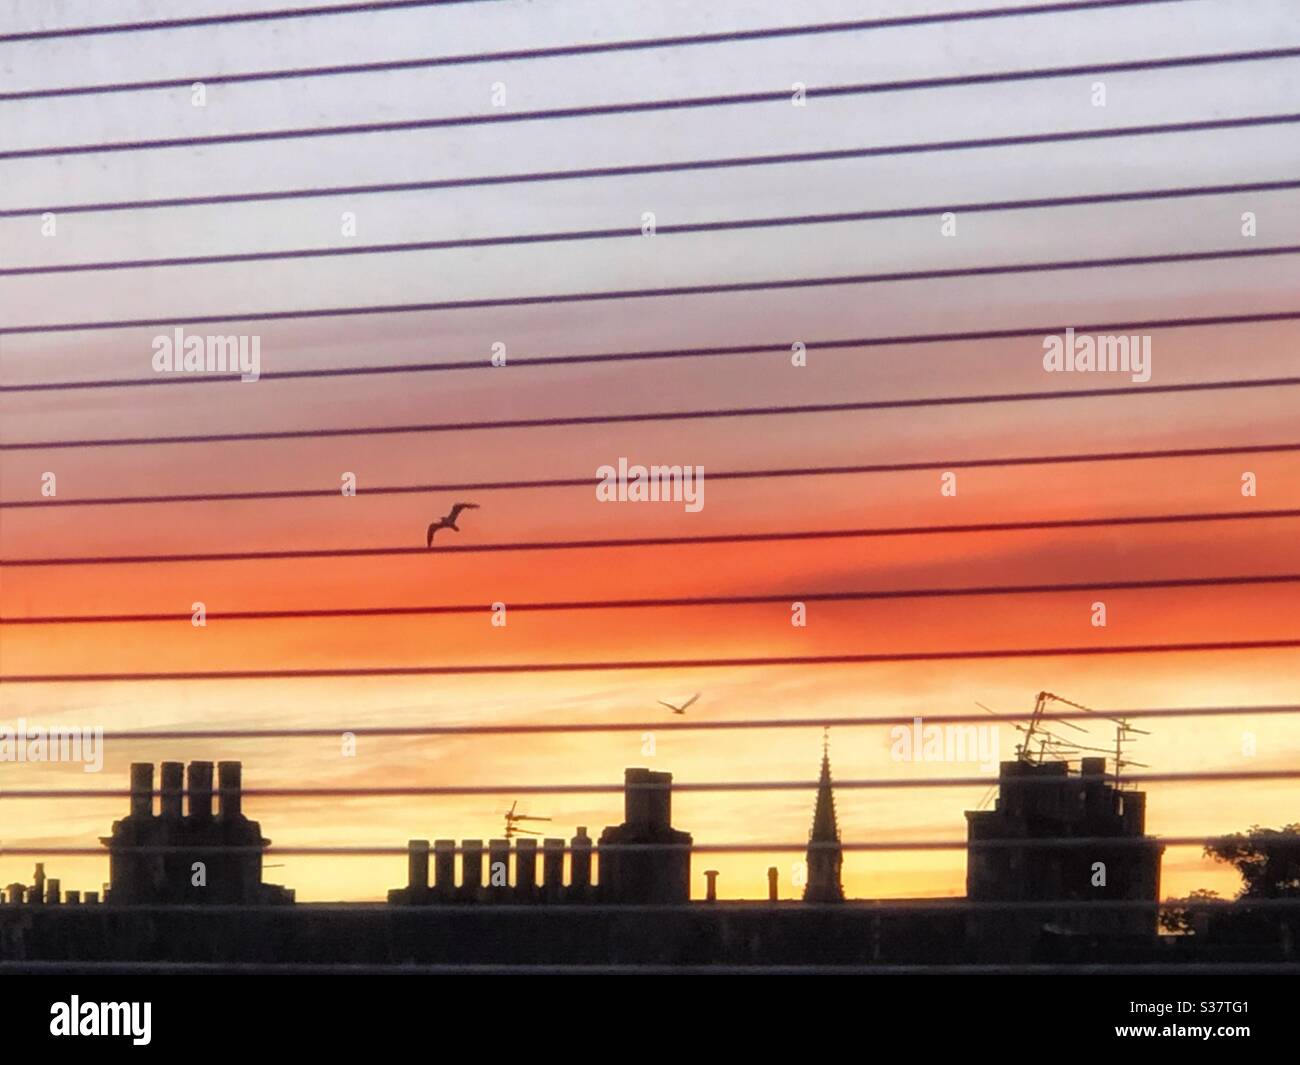 Sunset over city rooftops through the Venetian blinds Stock Photo